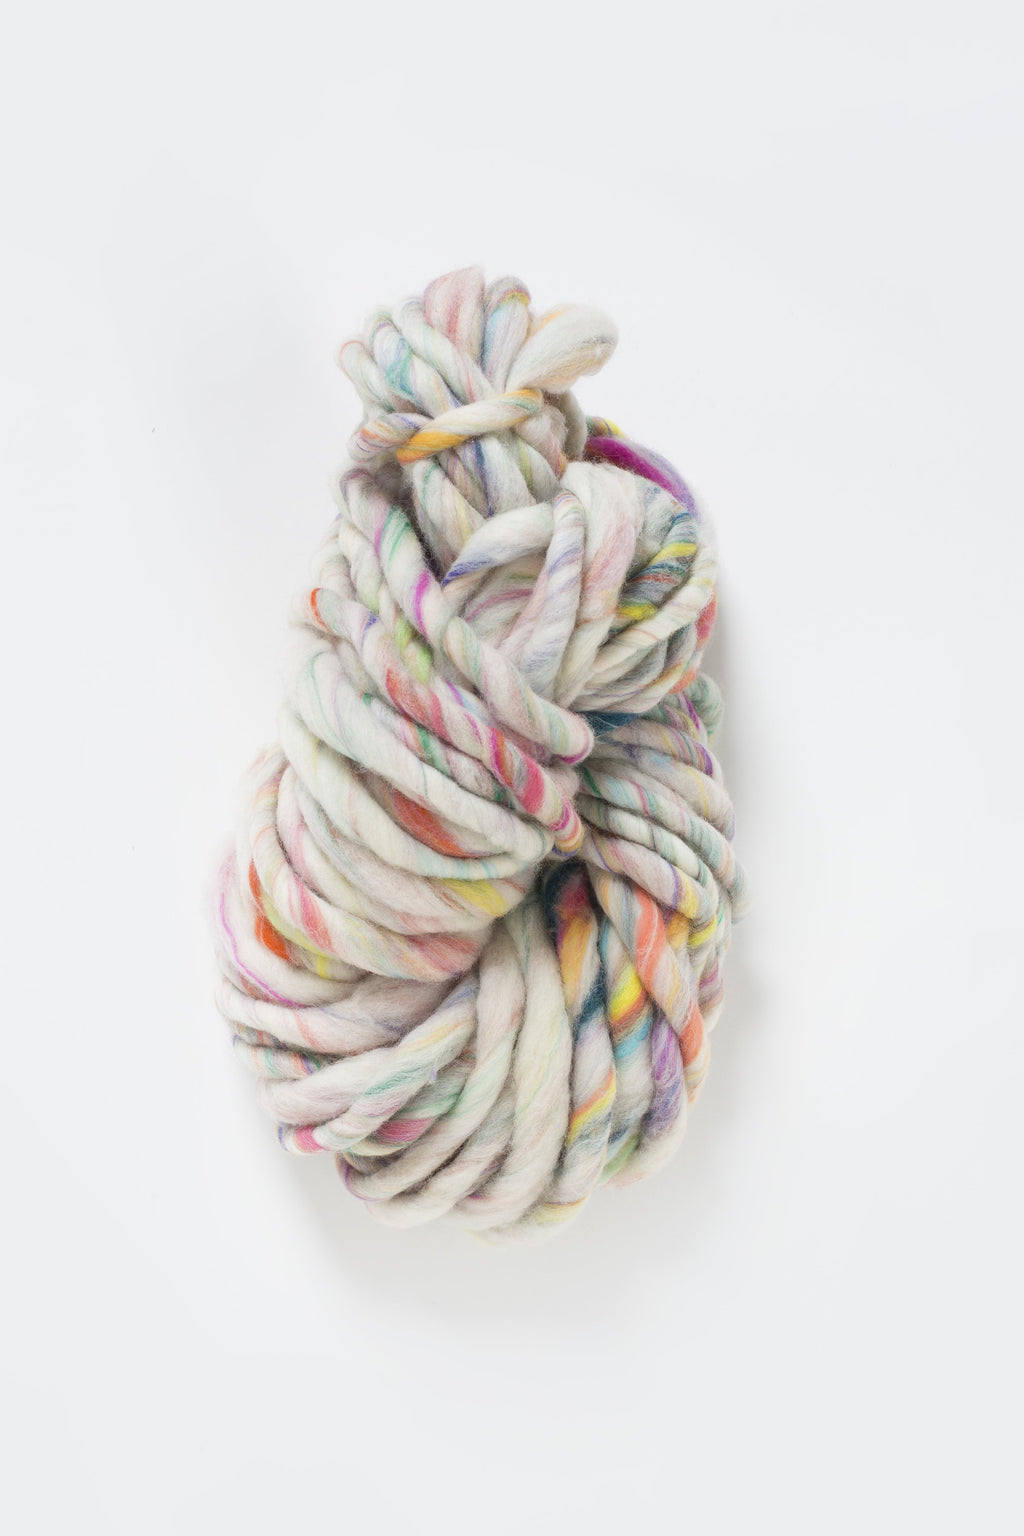 Wanderlust in Frolic - super bulky and chunky handspun yarn by knit collage